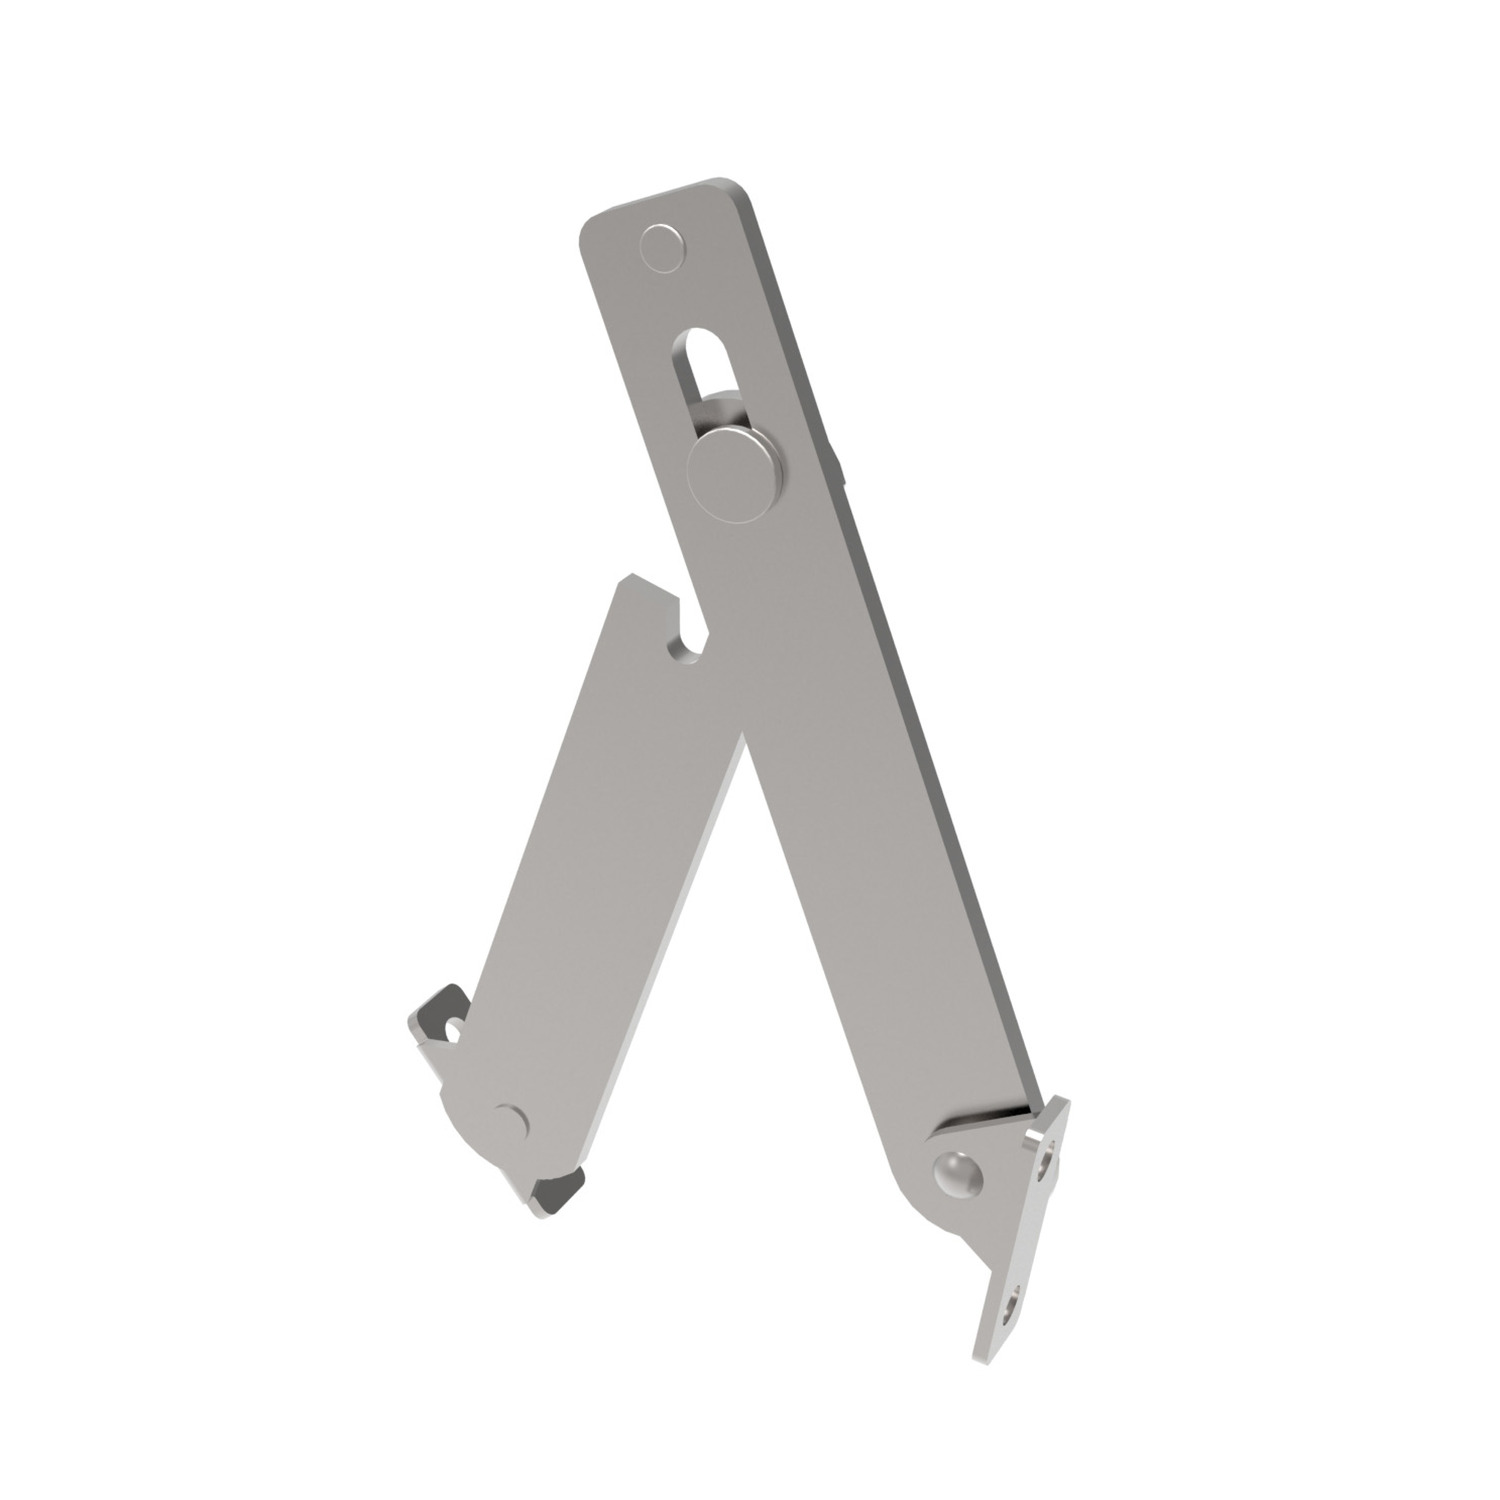 N0956.AC0008 Lid Stays - Heavy Duty Stainless steel - Right - 202mm. Supplied in multiples of 2